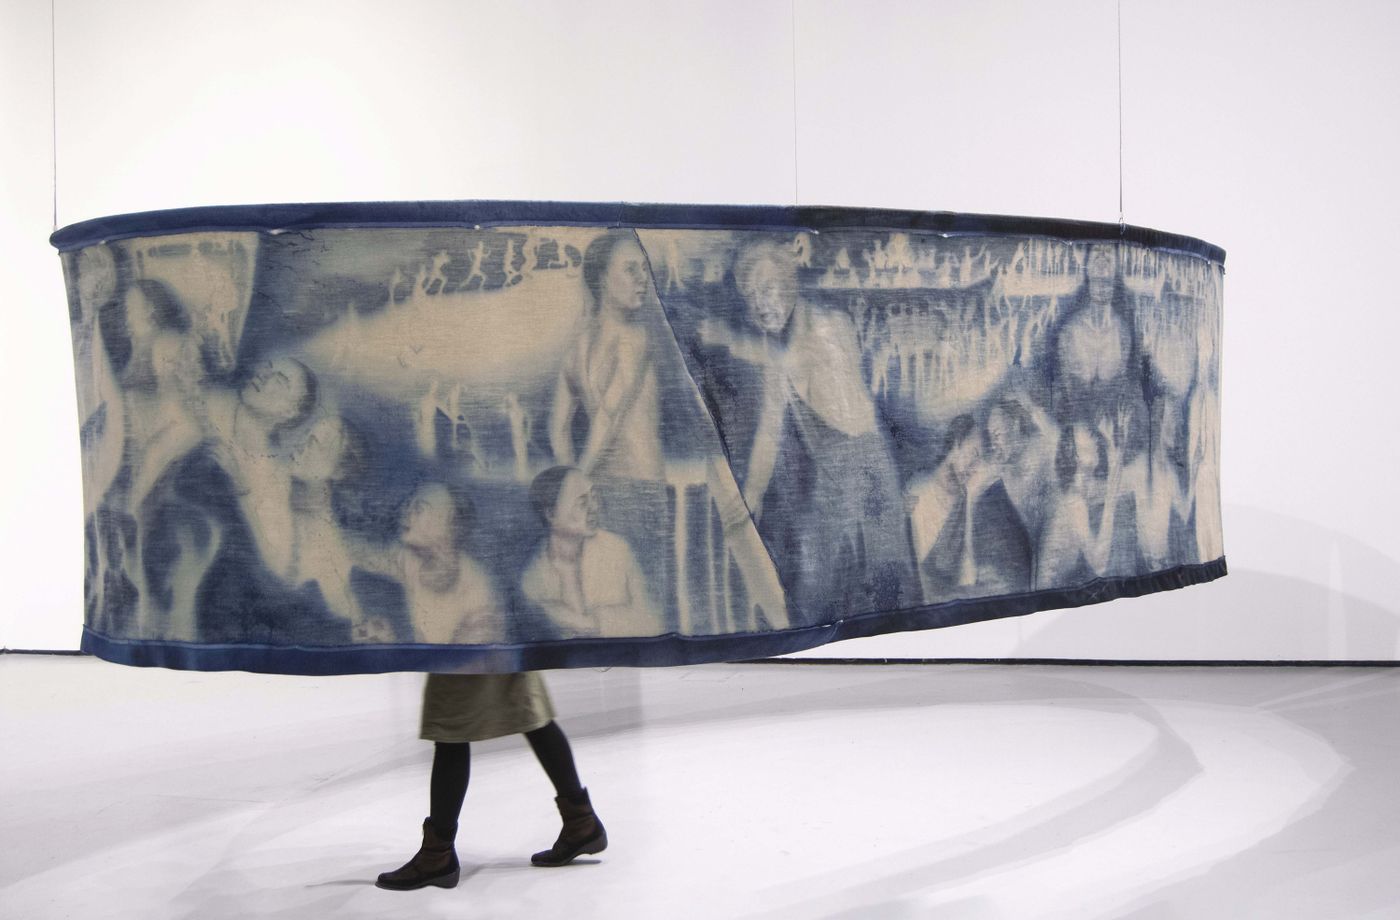 The Robert Browne, 2022. Fabric dye, charcoal, thread, linen, and steel; 78 x 96 x 168 in., painting dimensions 48 x 420 in. Photo courtesy the artist.